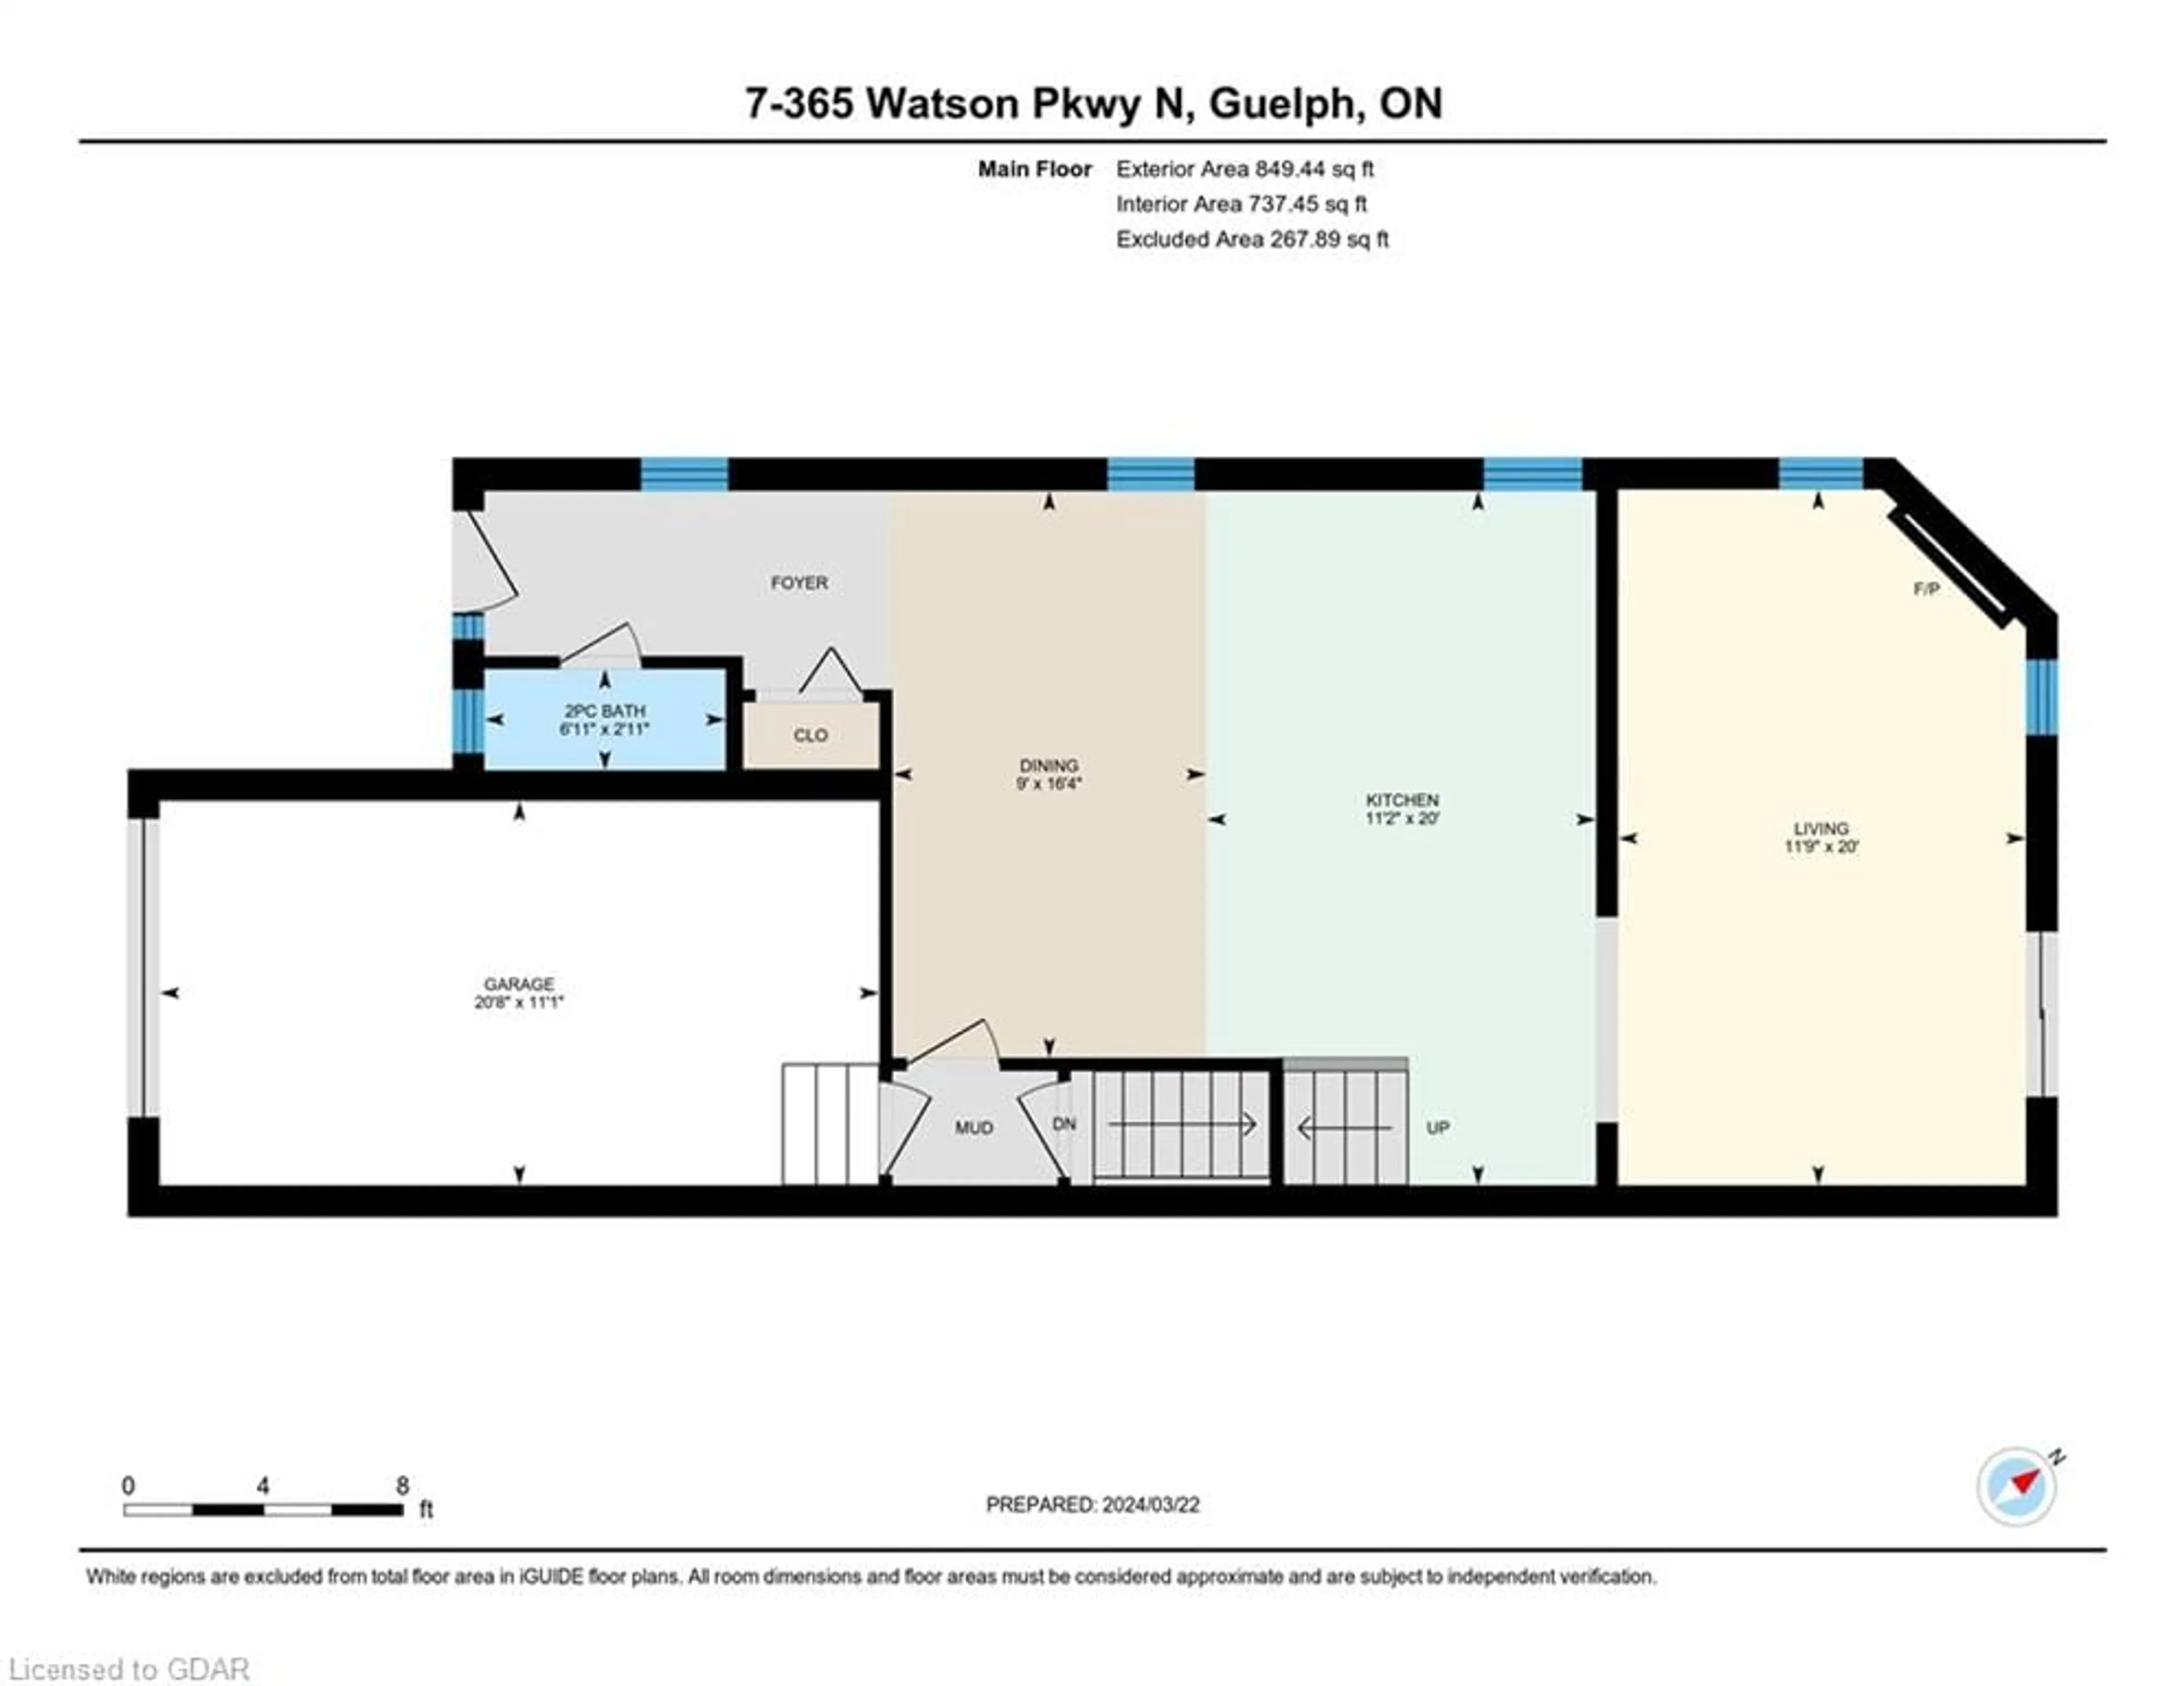 Floor plan for 365 Watson Parkway North #7, Guelph Ontario N1E 7K5